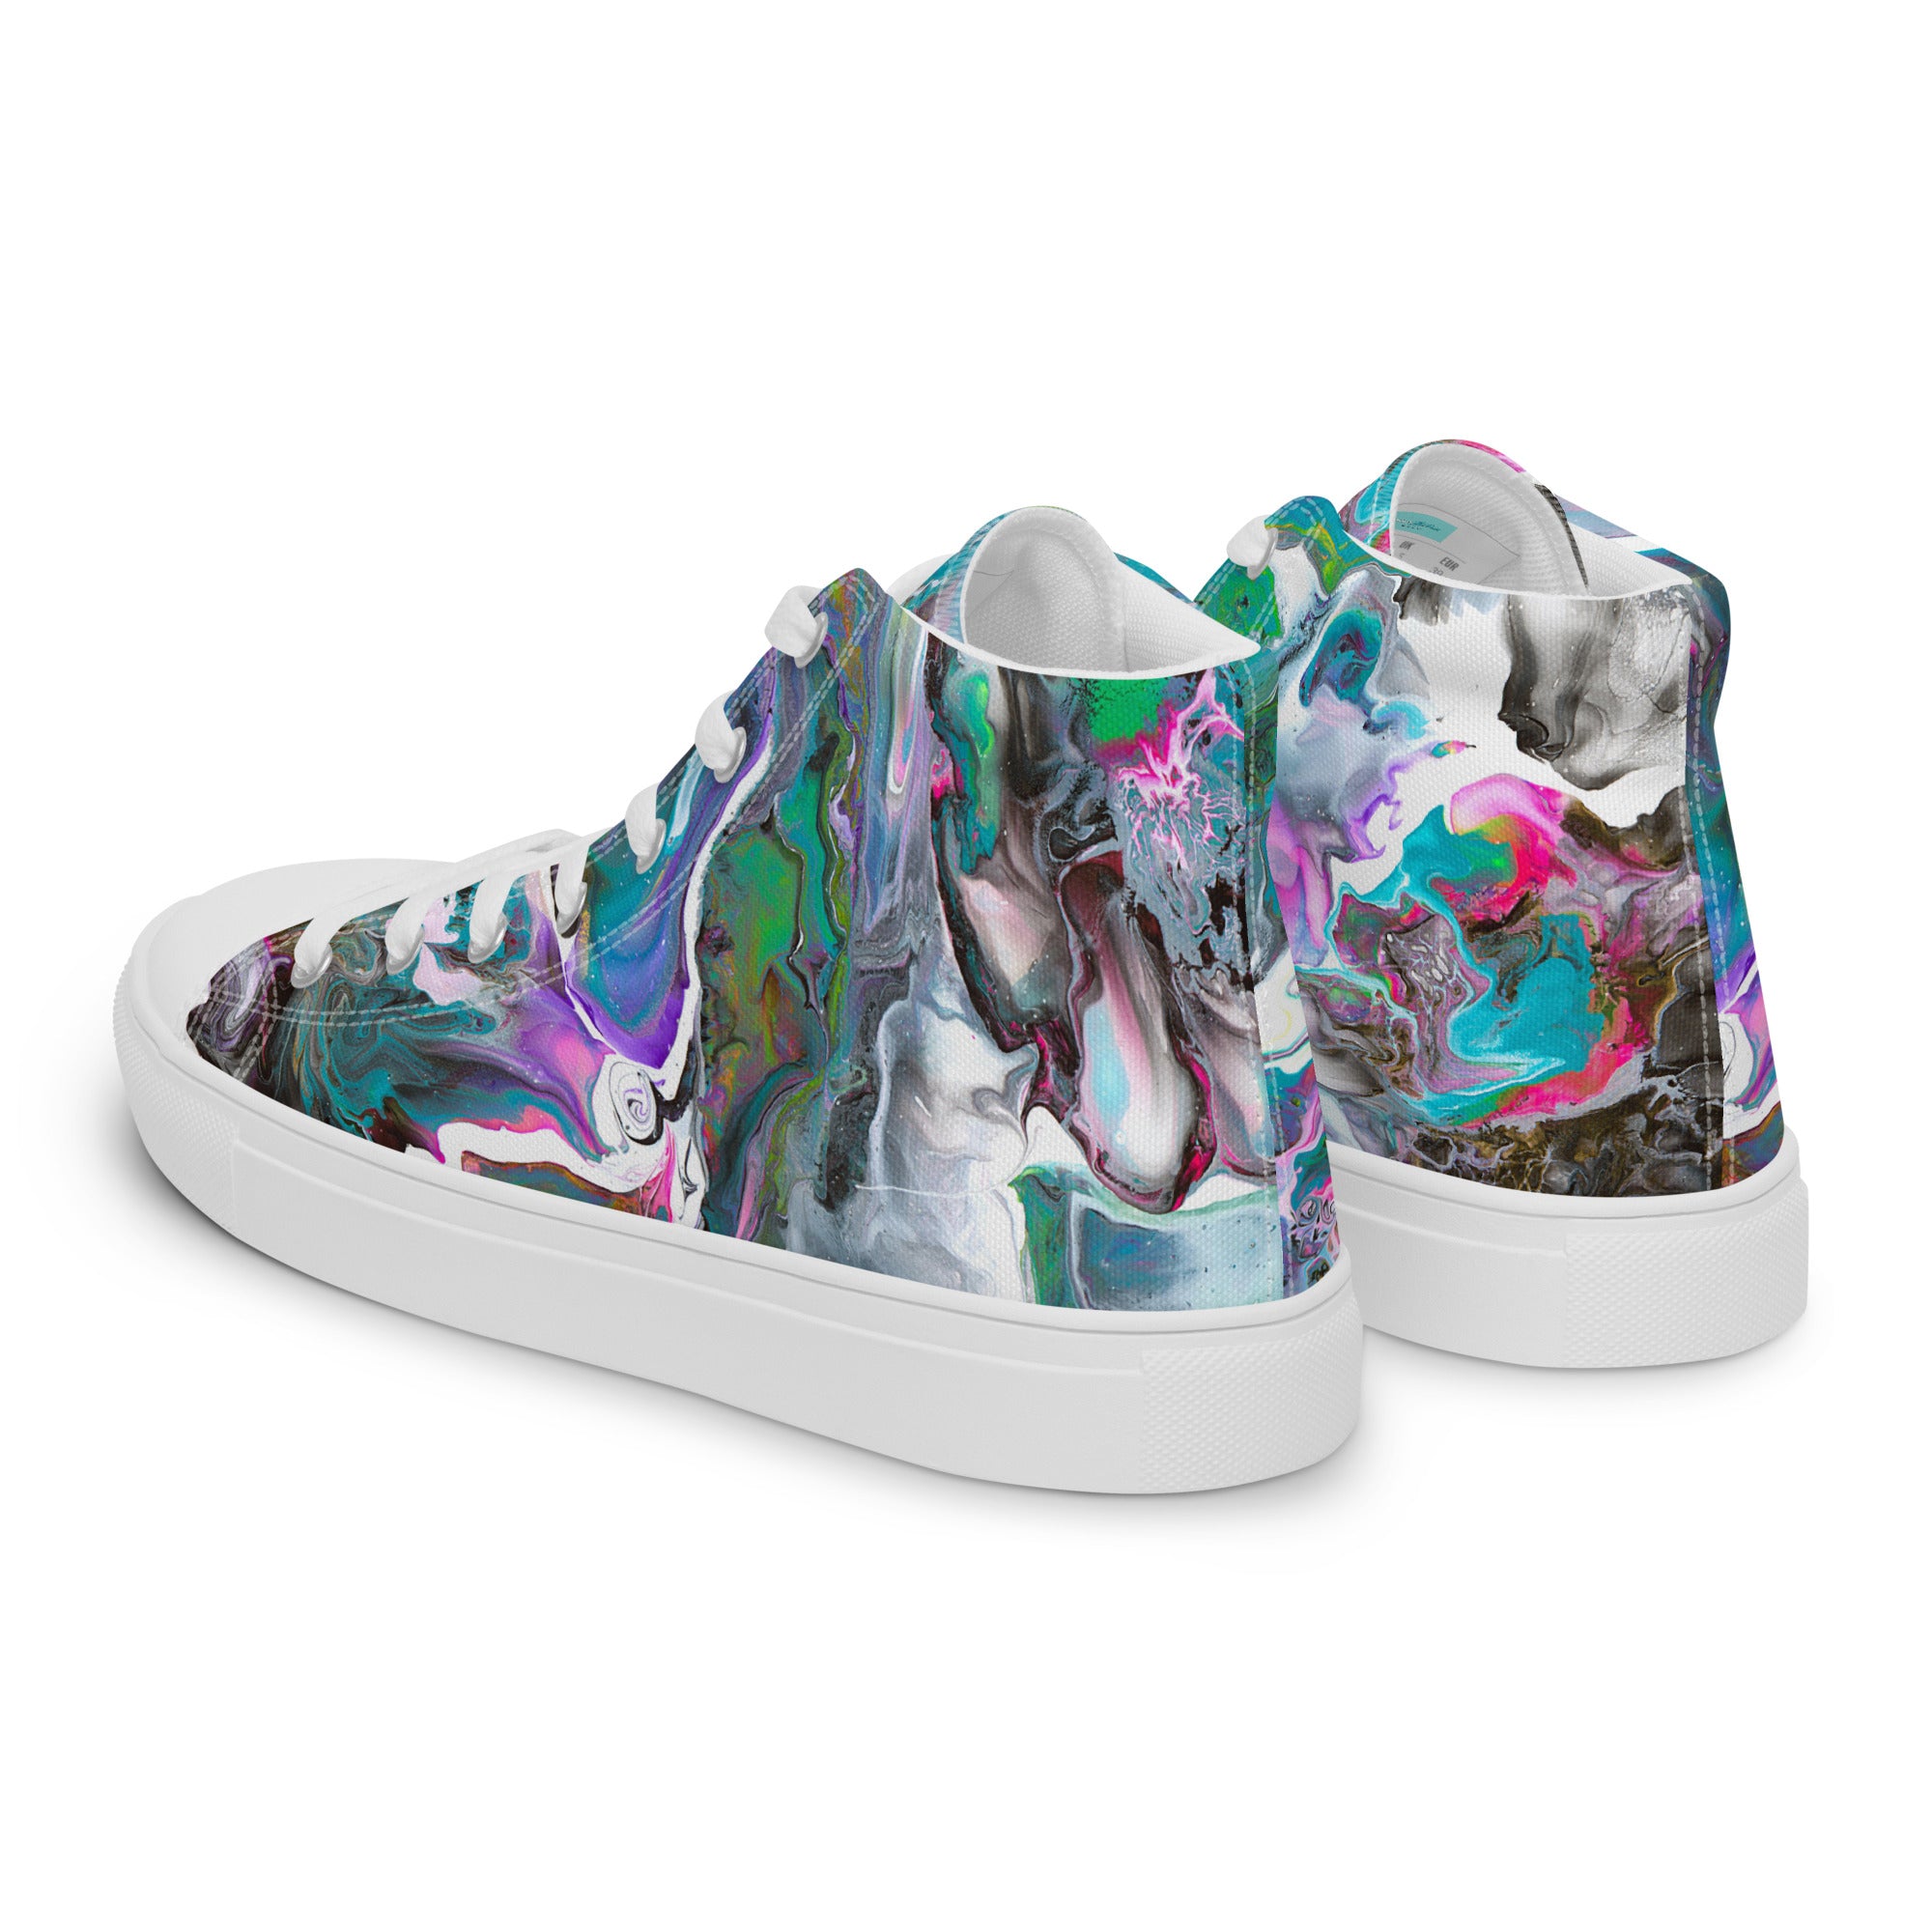 "Northern Lights" Women's High Top Shoes